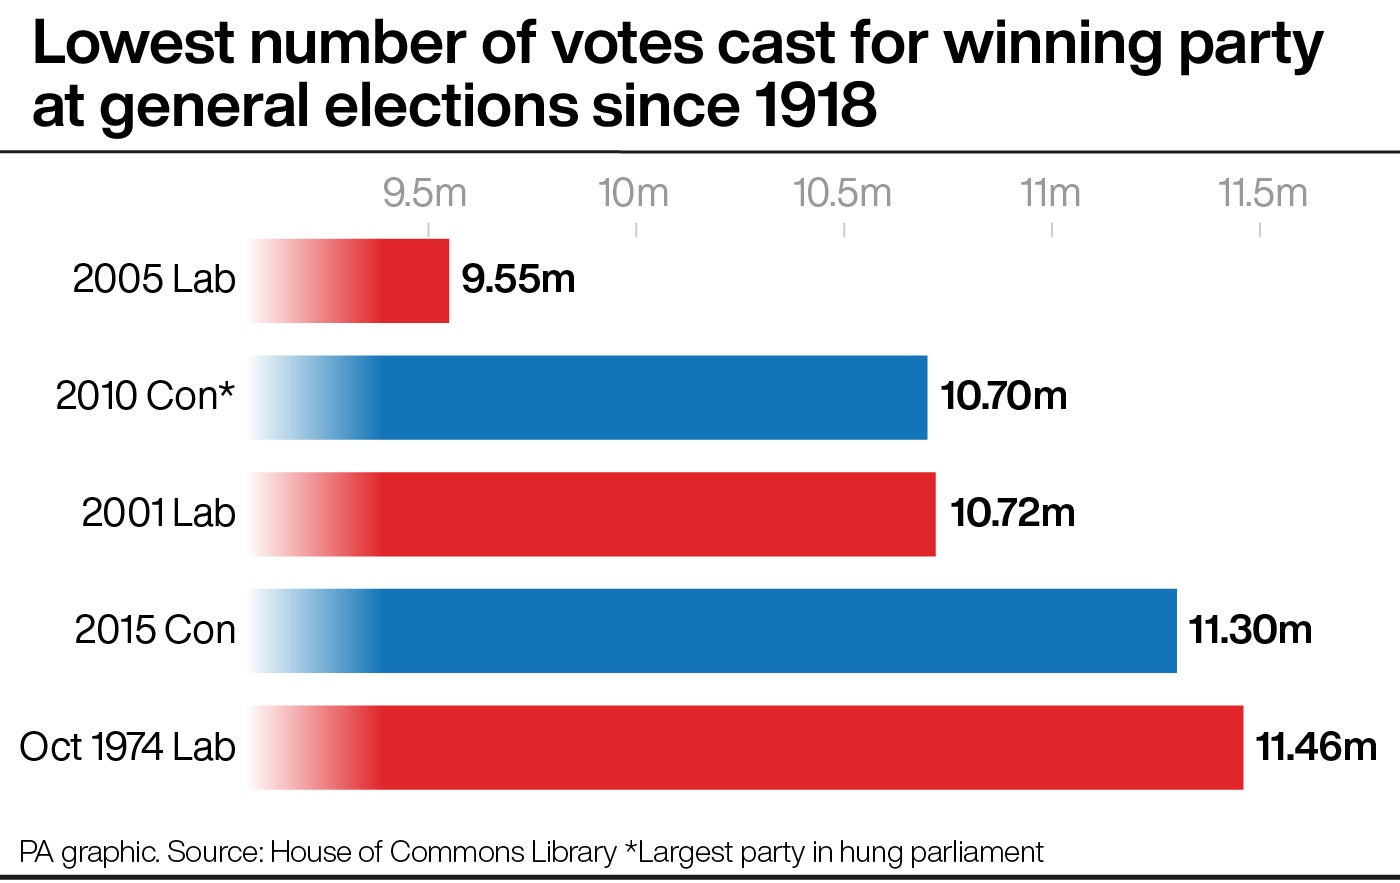 Lowest number of votes cast for winning parties at general elections since 1918 (PA Graphics)